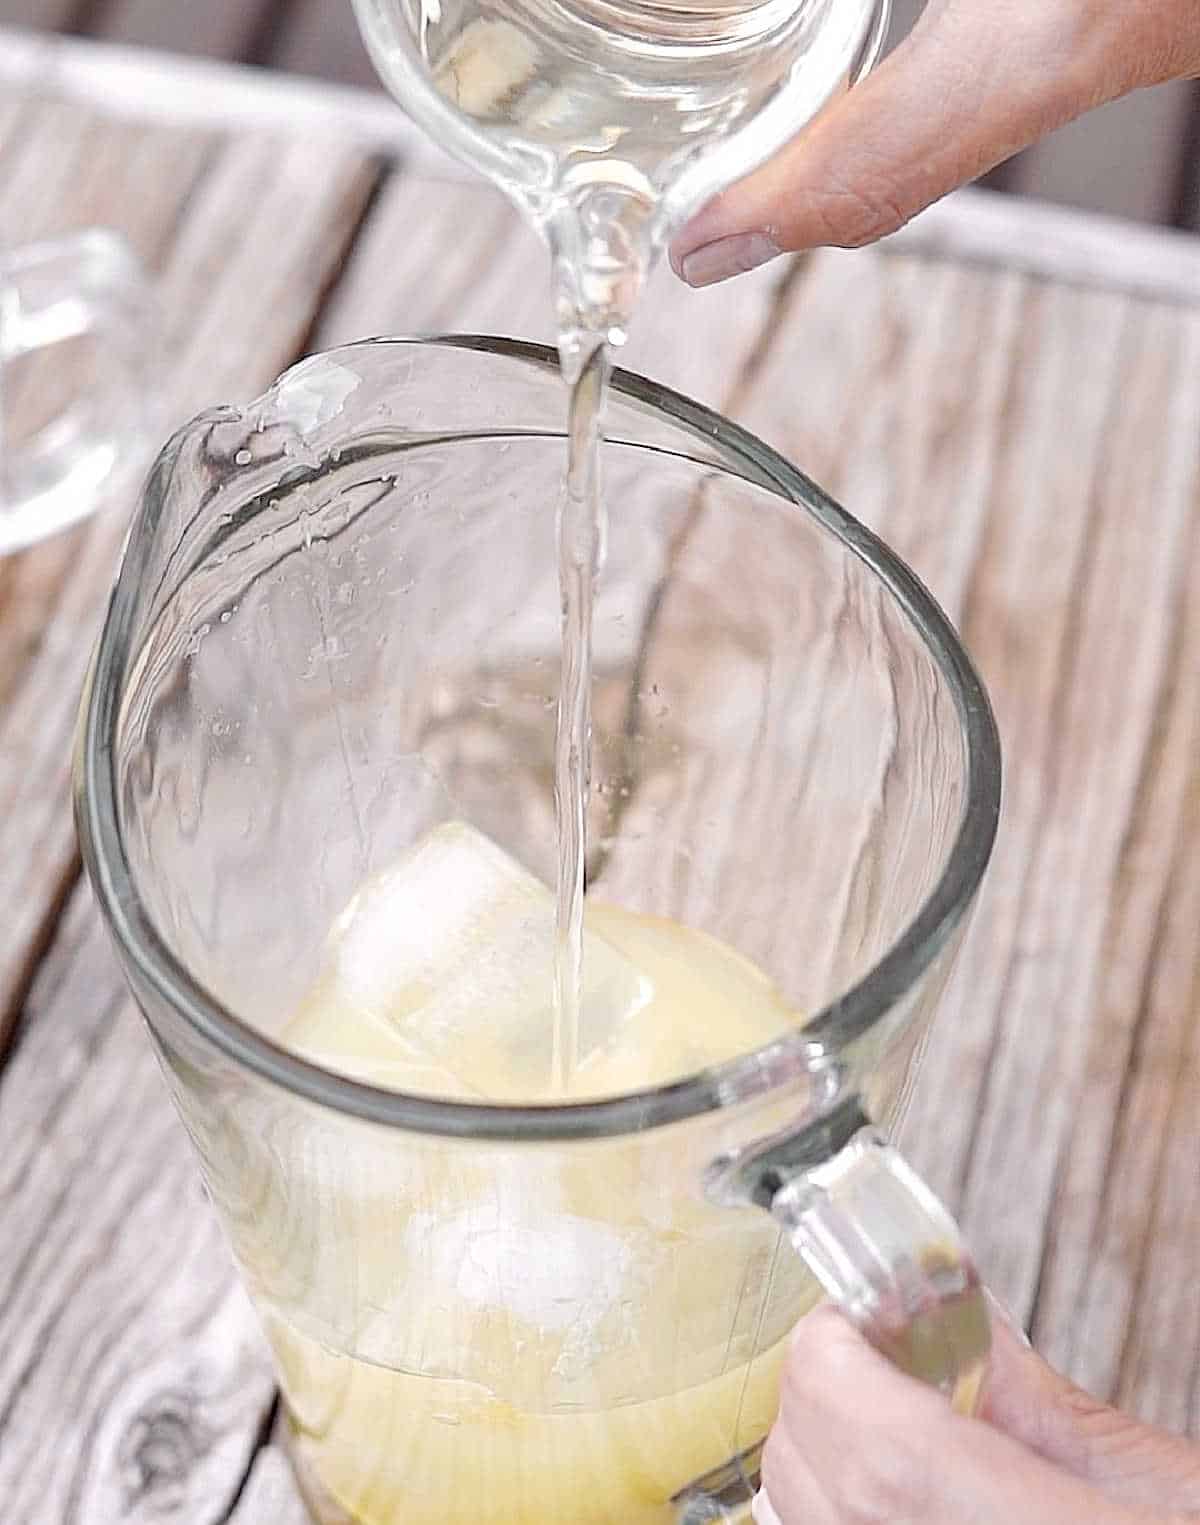 Pouring syrup into a pitcher with lemon juice and ice cubes. Grey wooden surface.